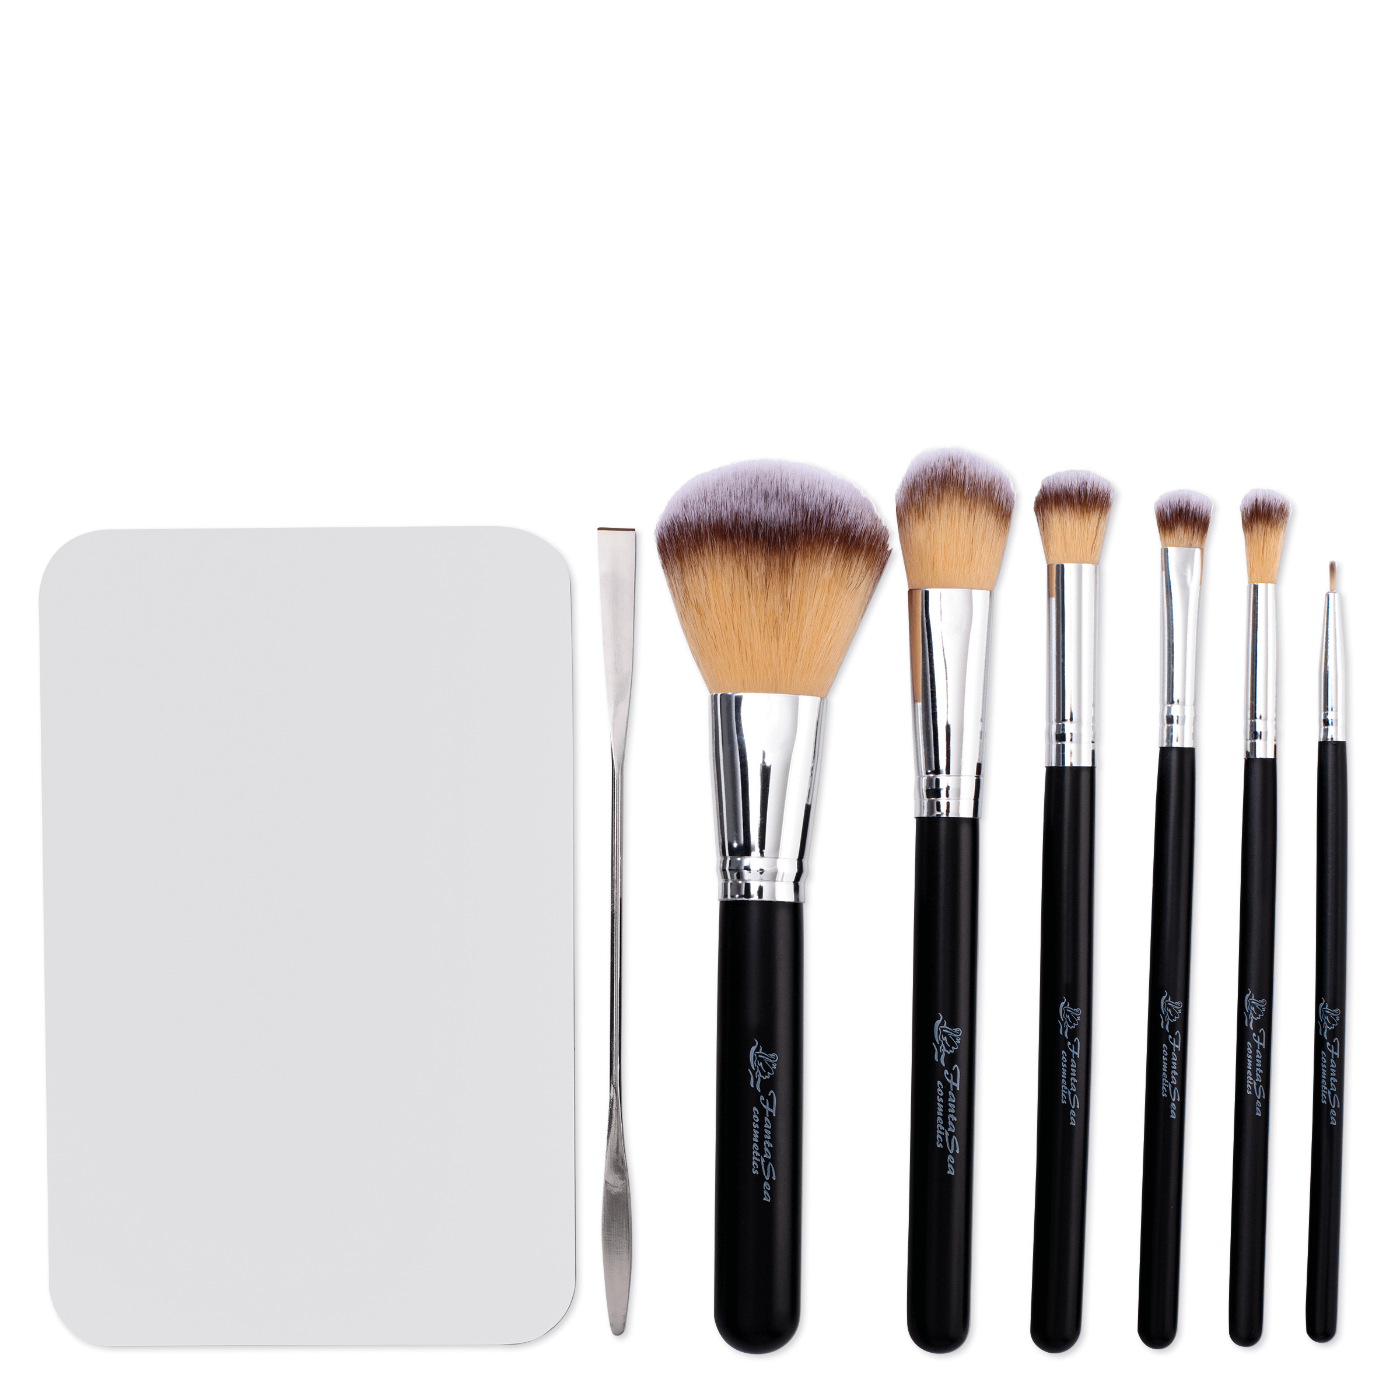 High Definition Makeup Brush Set with Case - 8 pc.